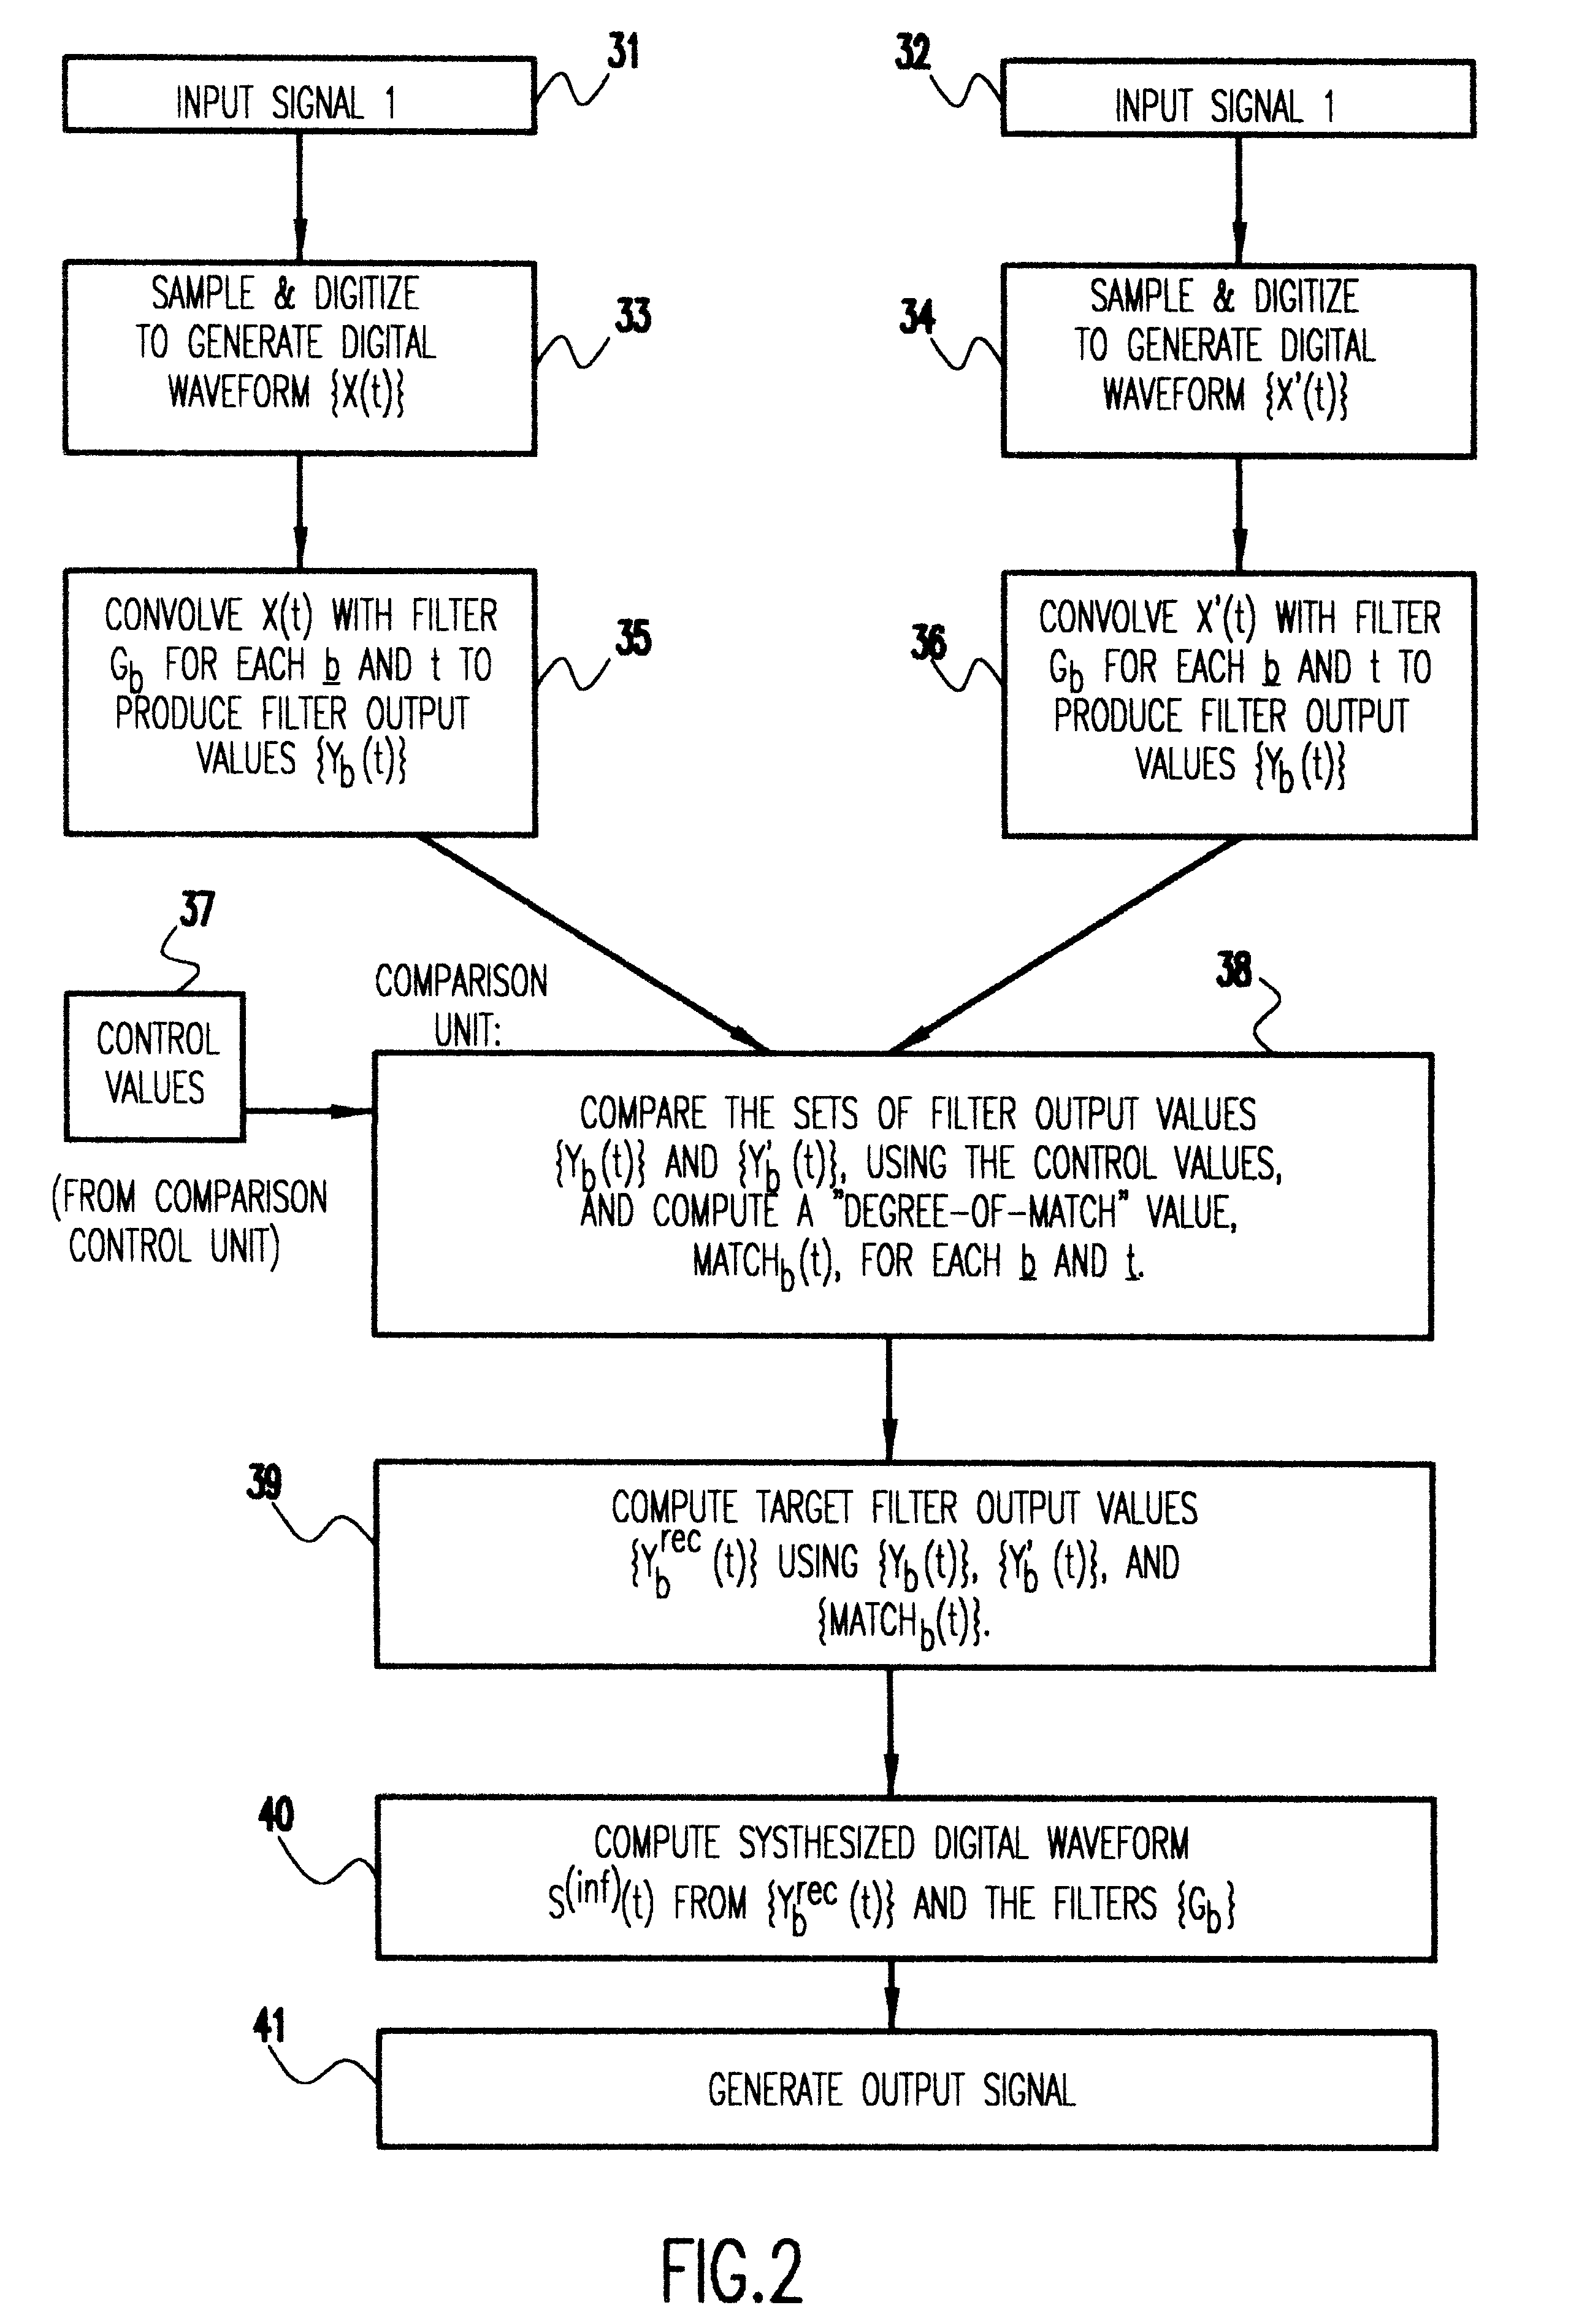 Separation of a mixture of acoustic sources into its components